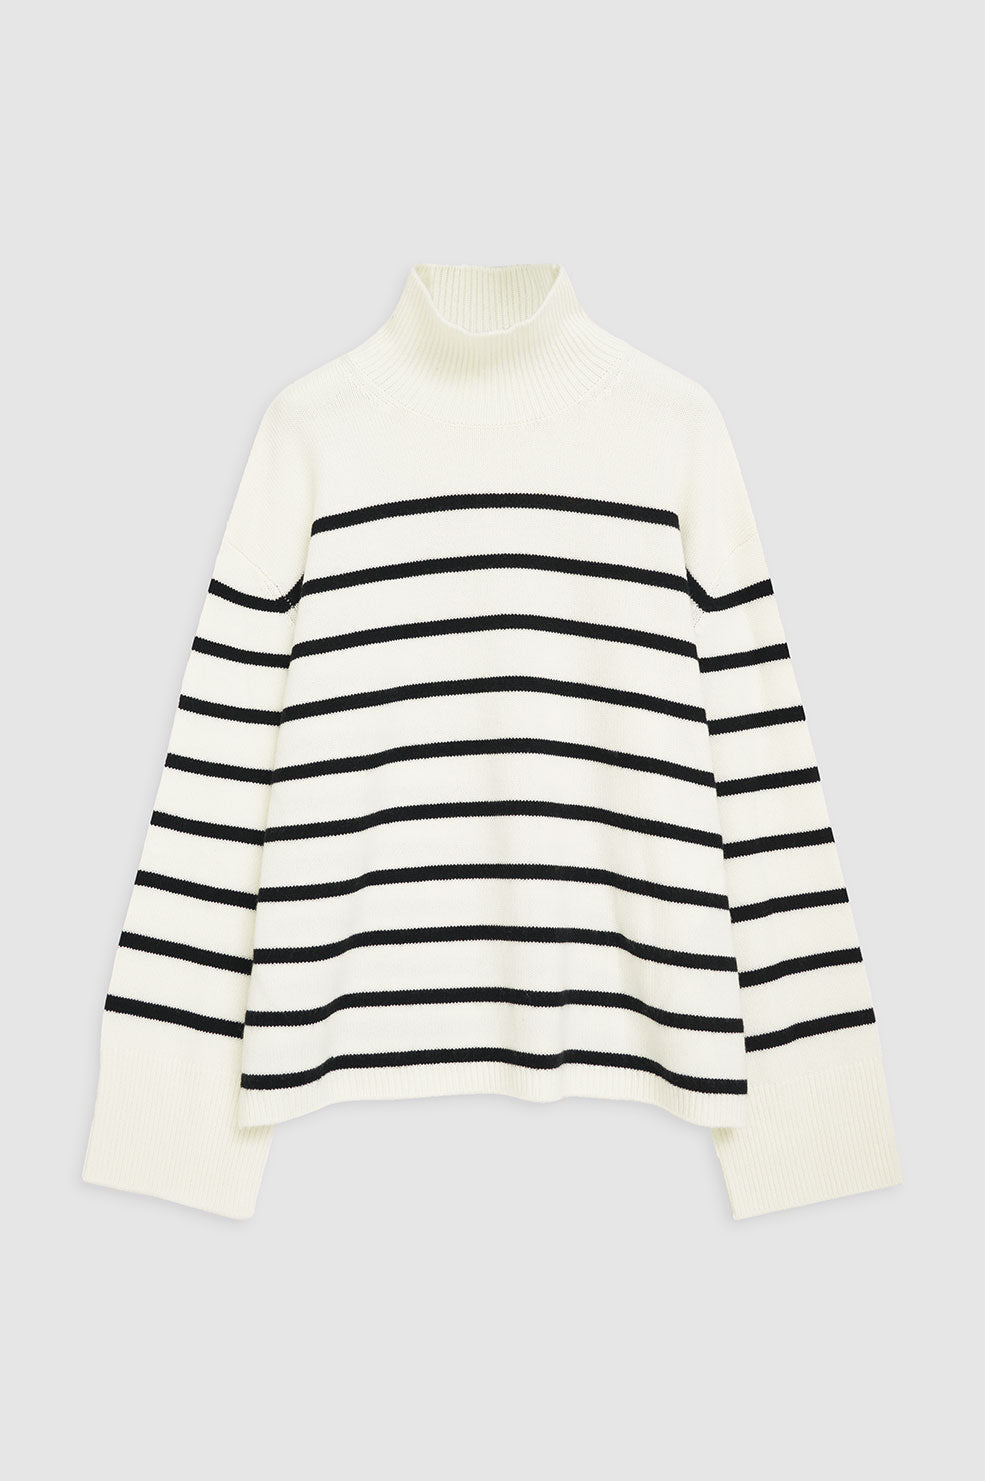 ANINE BING Courtney Sweater - Ivory And Black Stripe - Front View